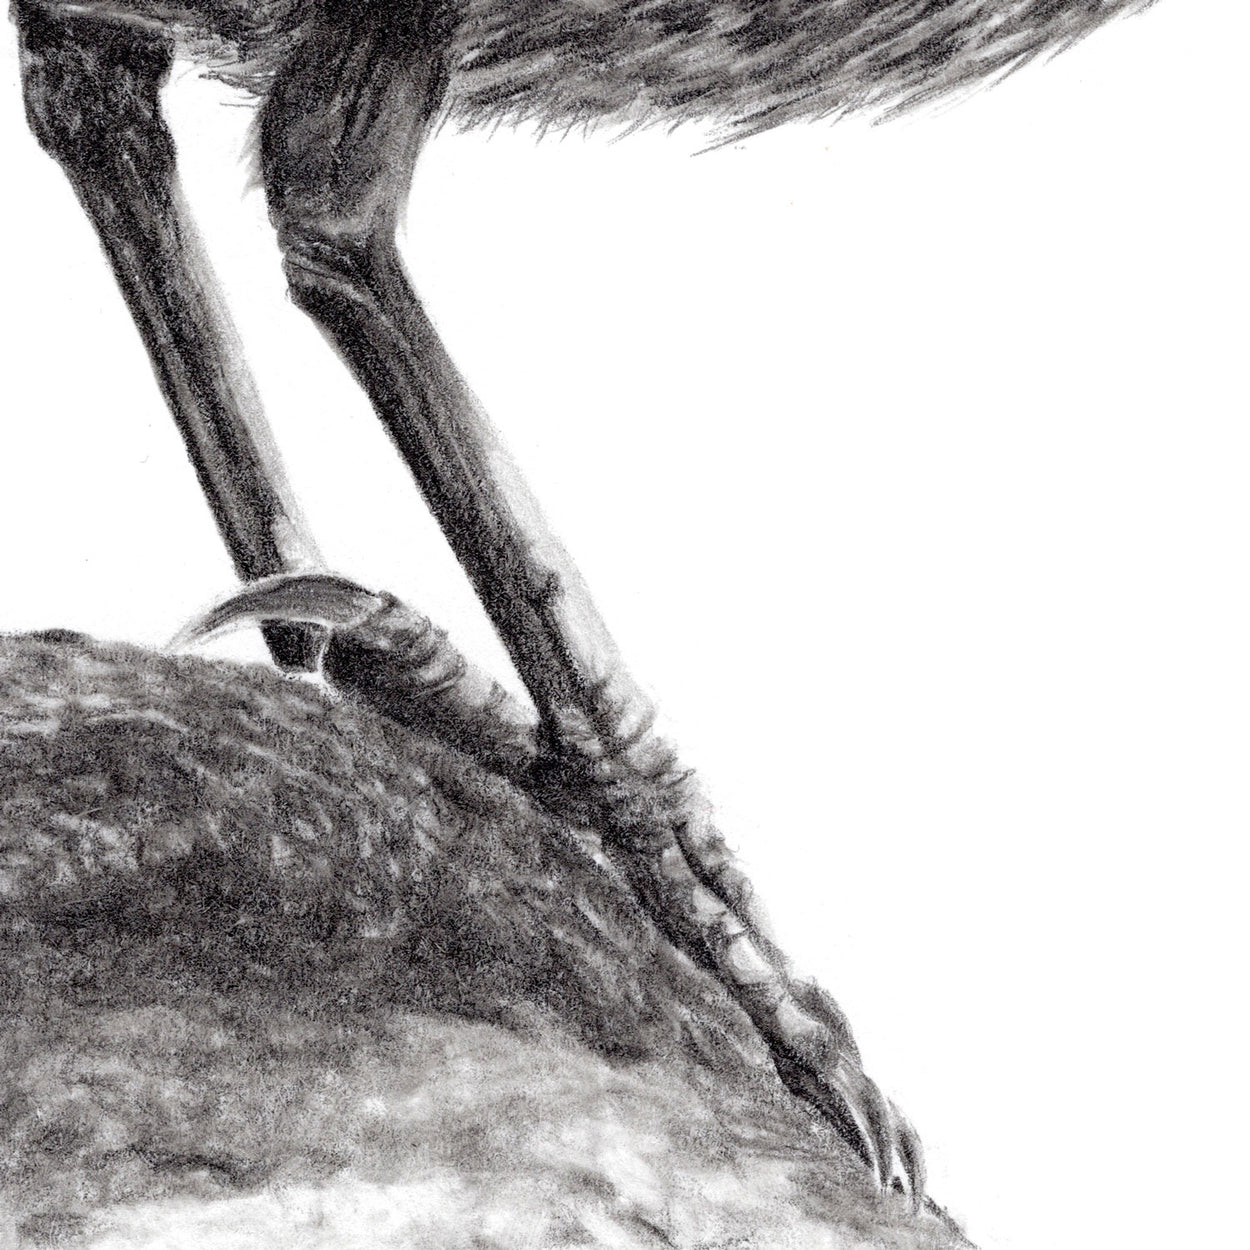 Dipper Bird Pencil Drawing Close-up - The Thriving Wild